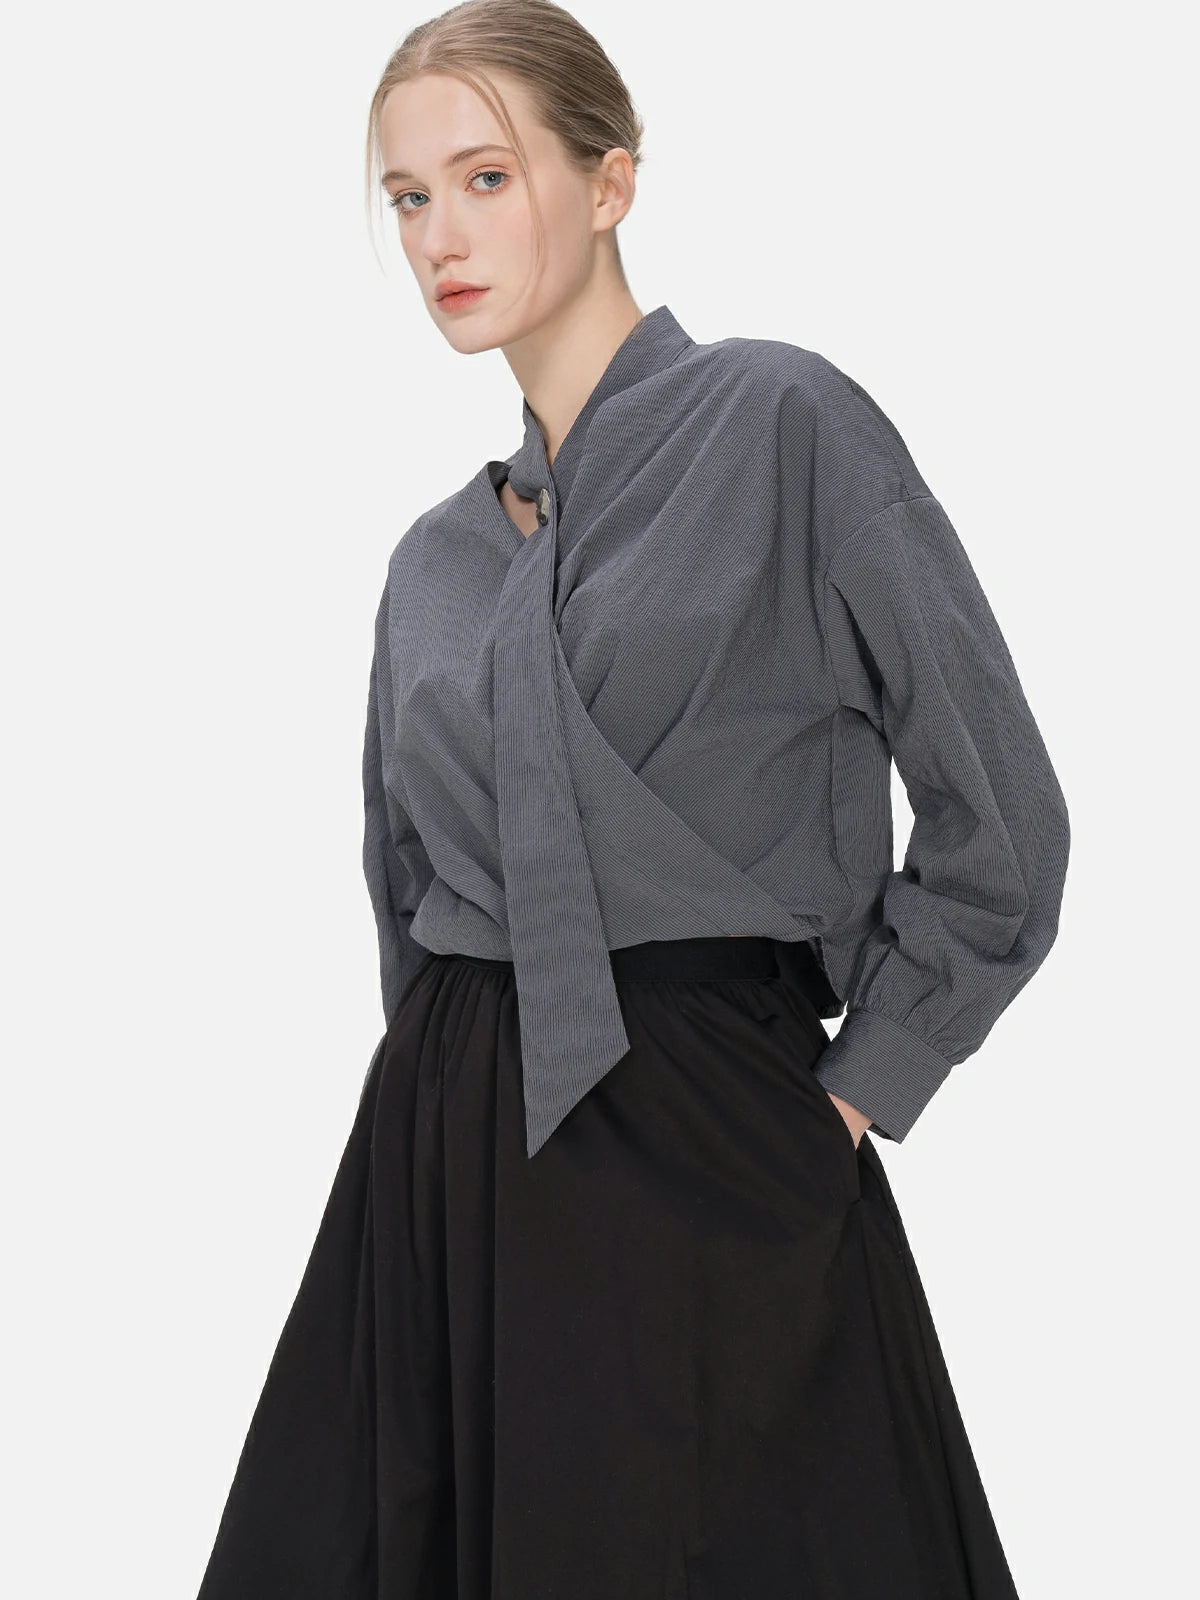 Unique charm meets contemporary style in this V-neck blouse with cascading ribbons and a cross-folded hem, perfect for a fashion-forward look.